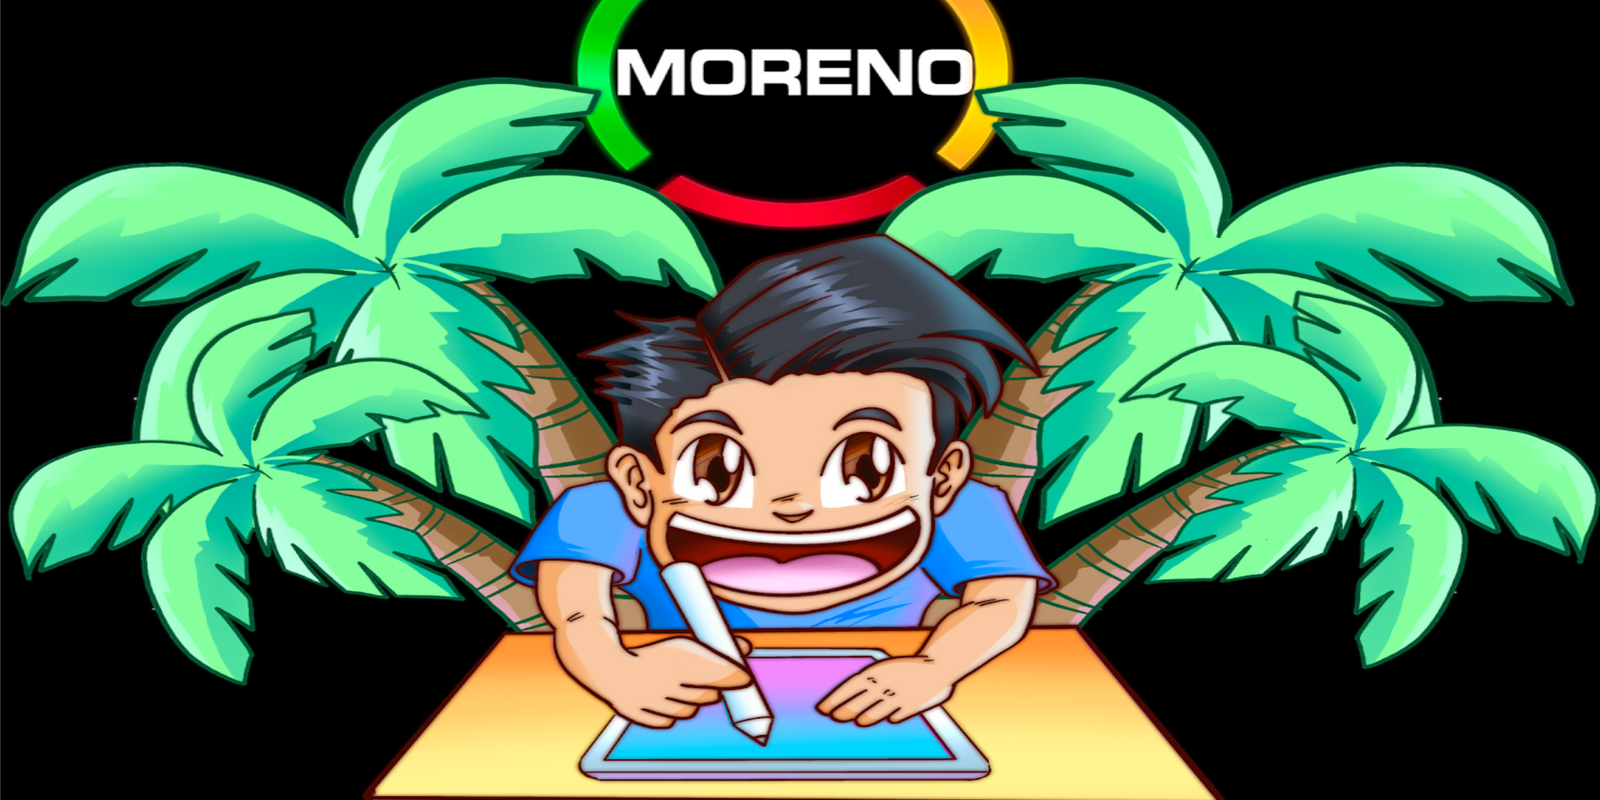 Introducing Our Art Contest Winner, MORENO!